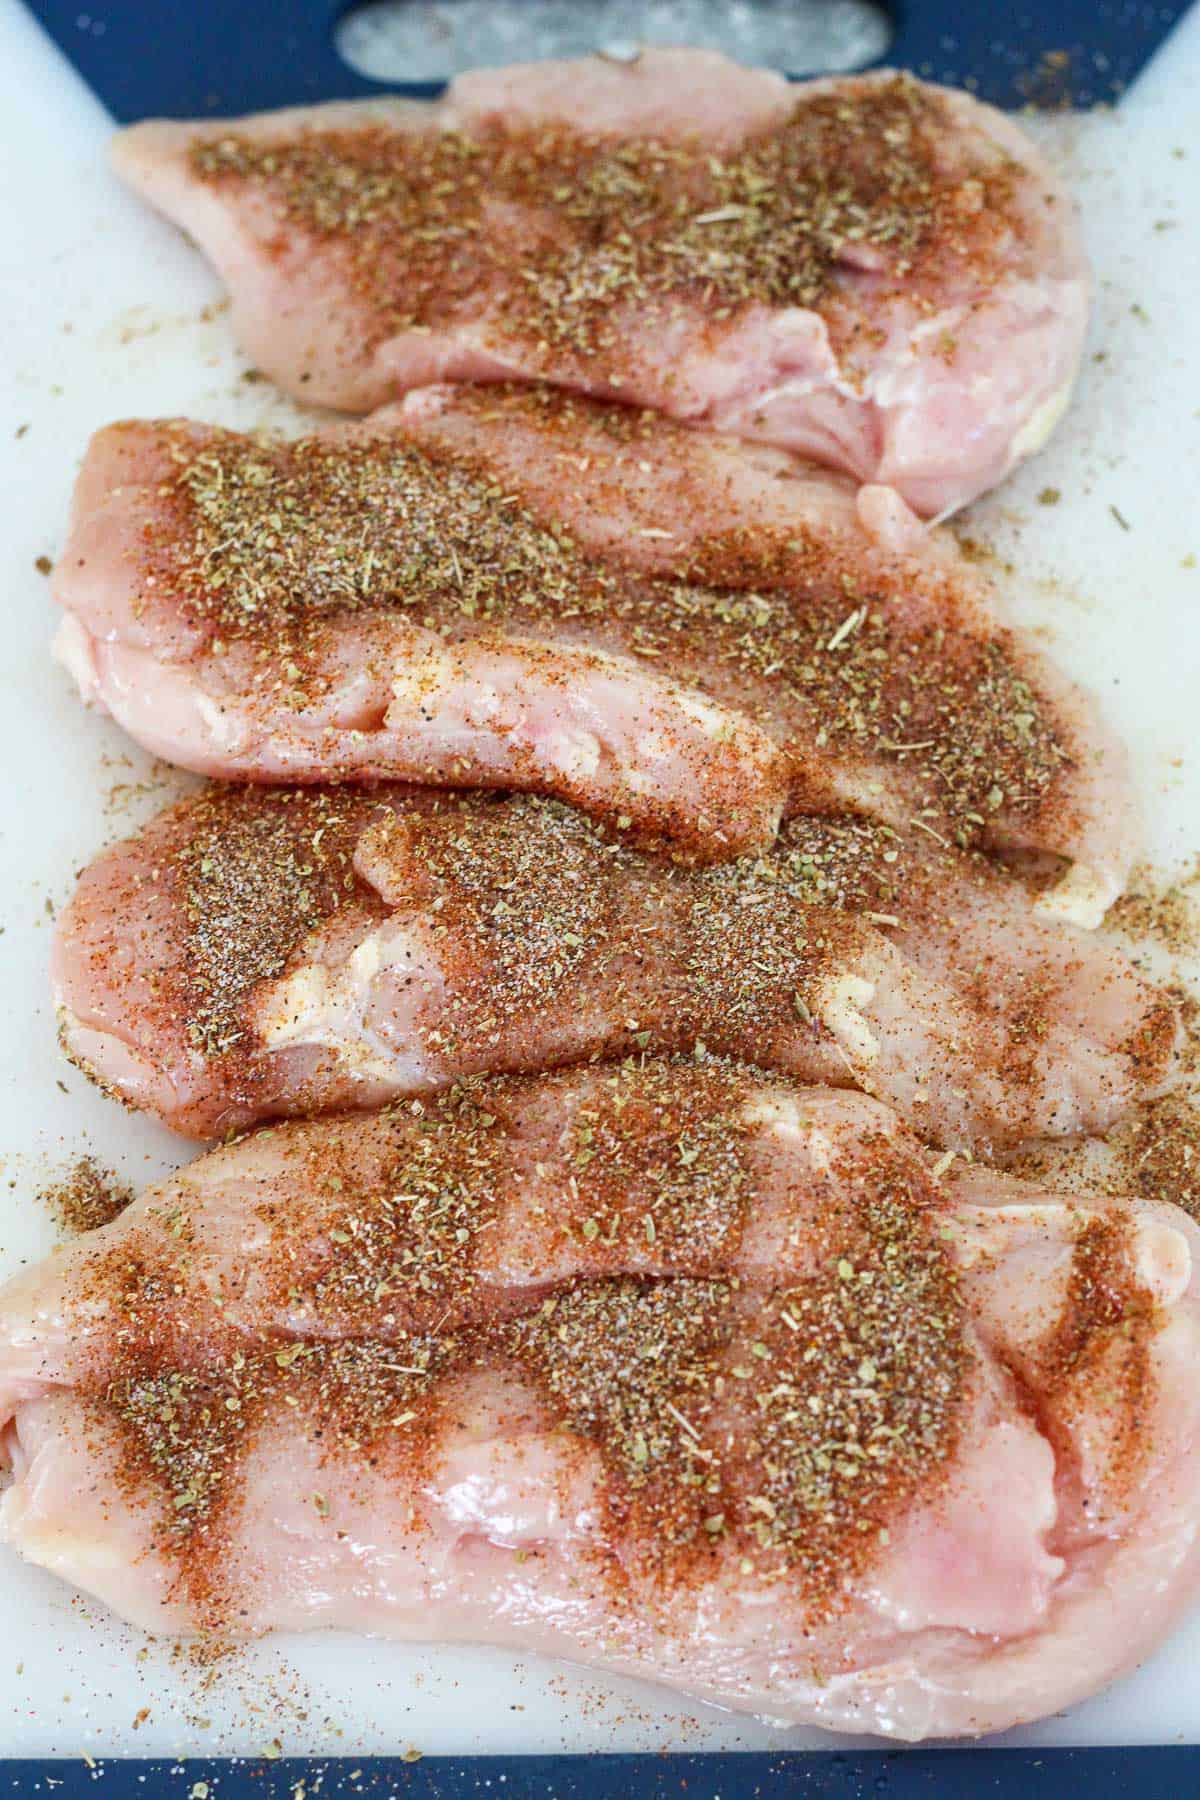 Seasoned chicken with salt, pepper, oregano and paprika.